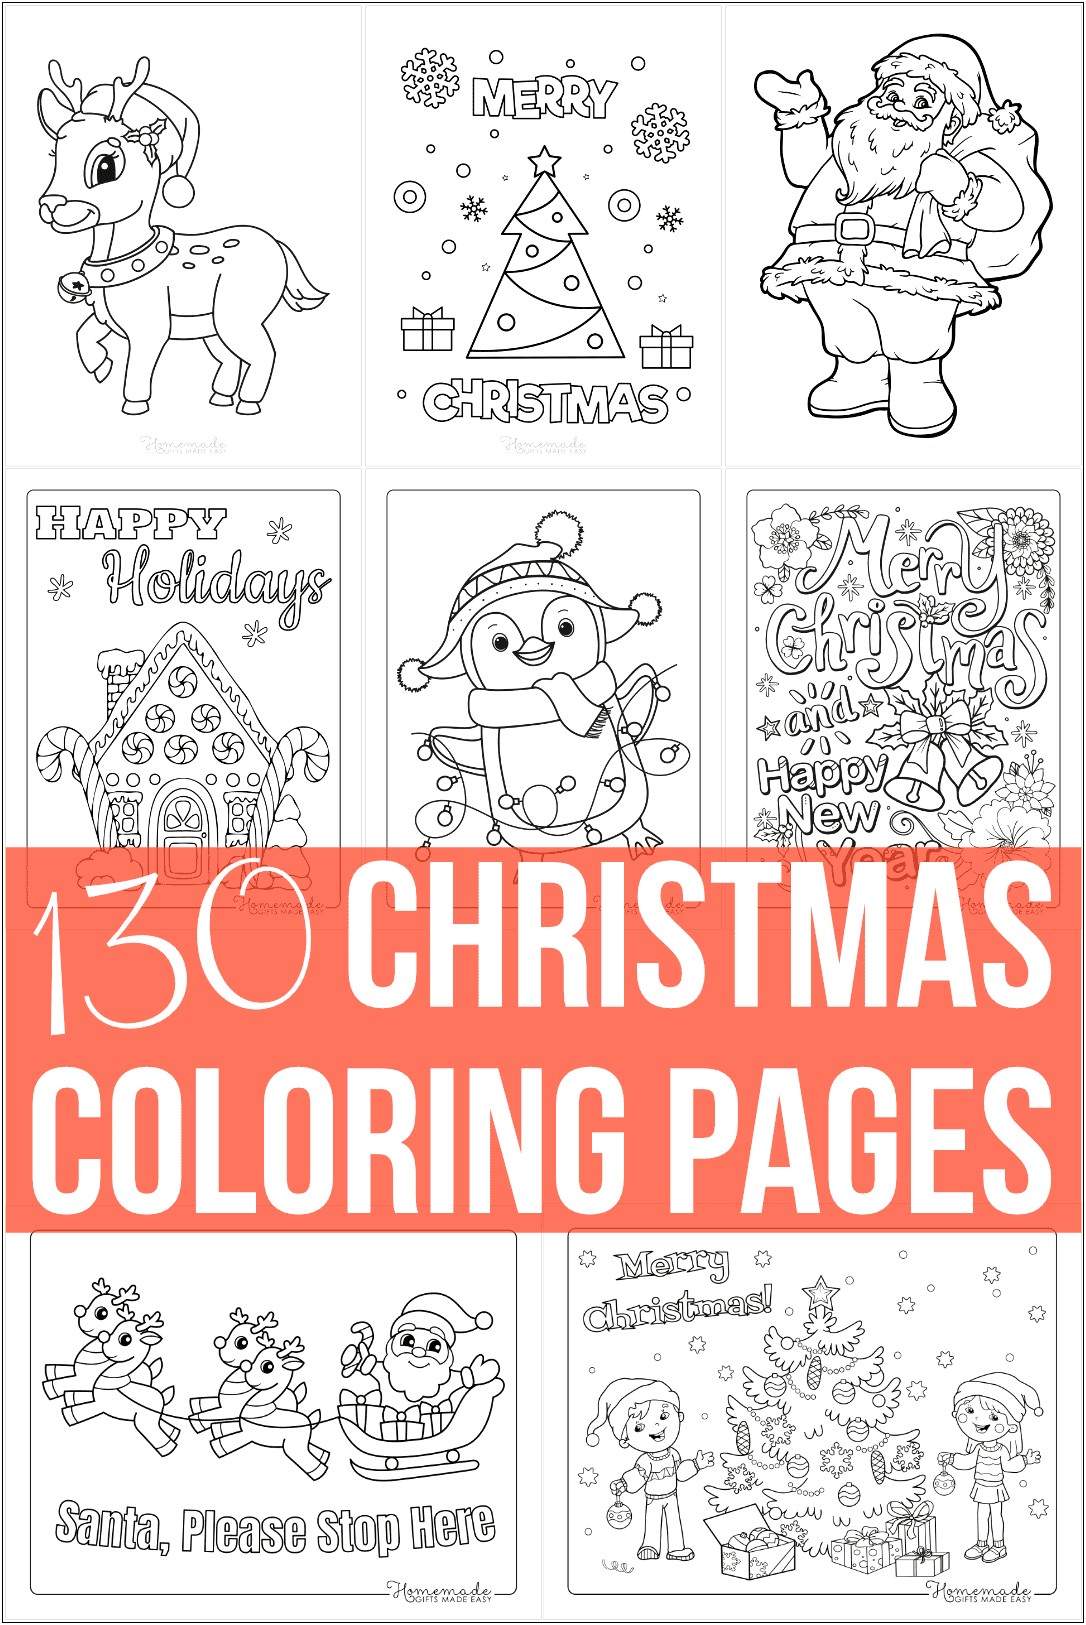 free-printable-merry-christmas-coloring-pages